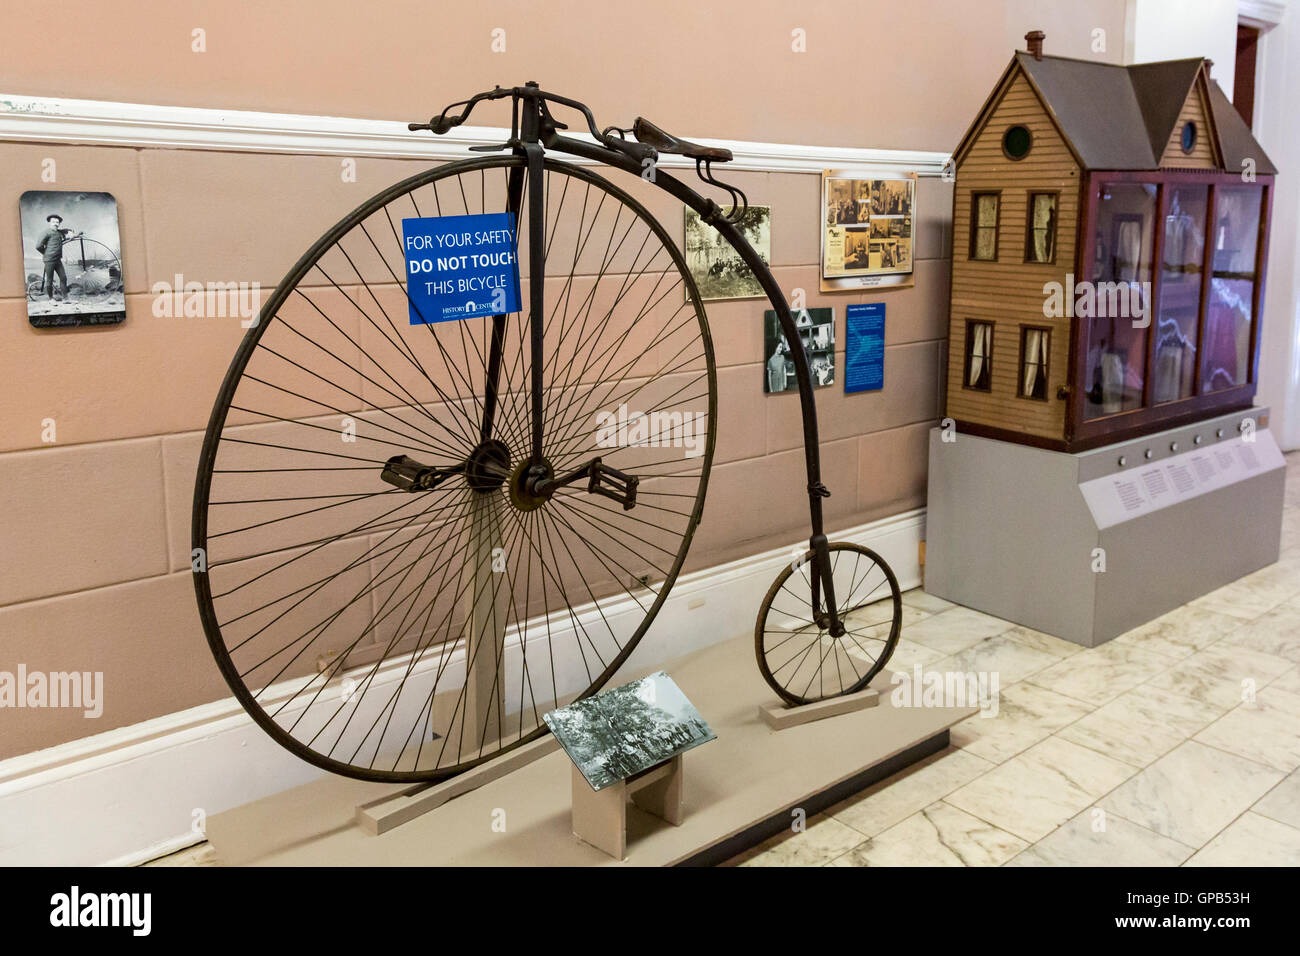 Fort Wayne, Indiana - A penny-farthing bicycle and dollhouse on display at the History Center museum. Stock Photo